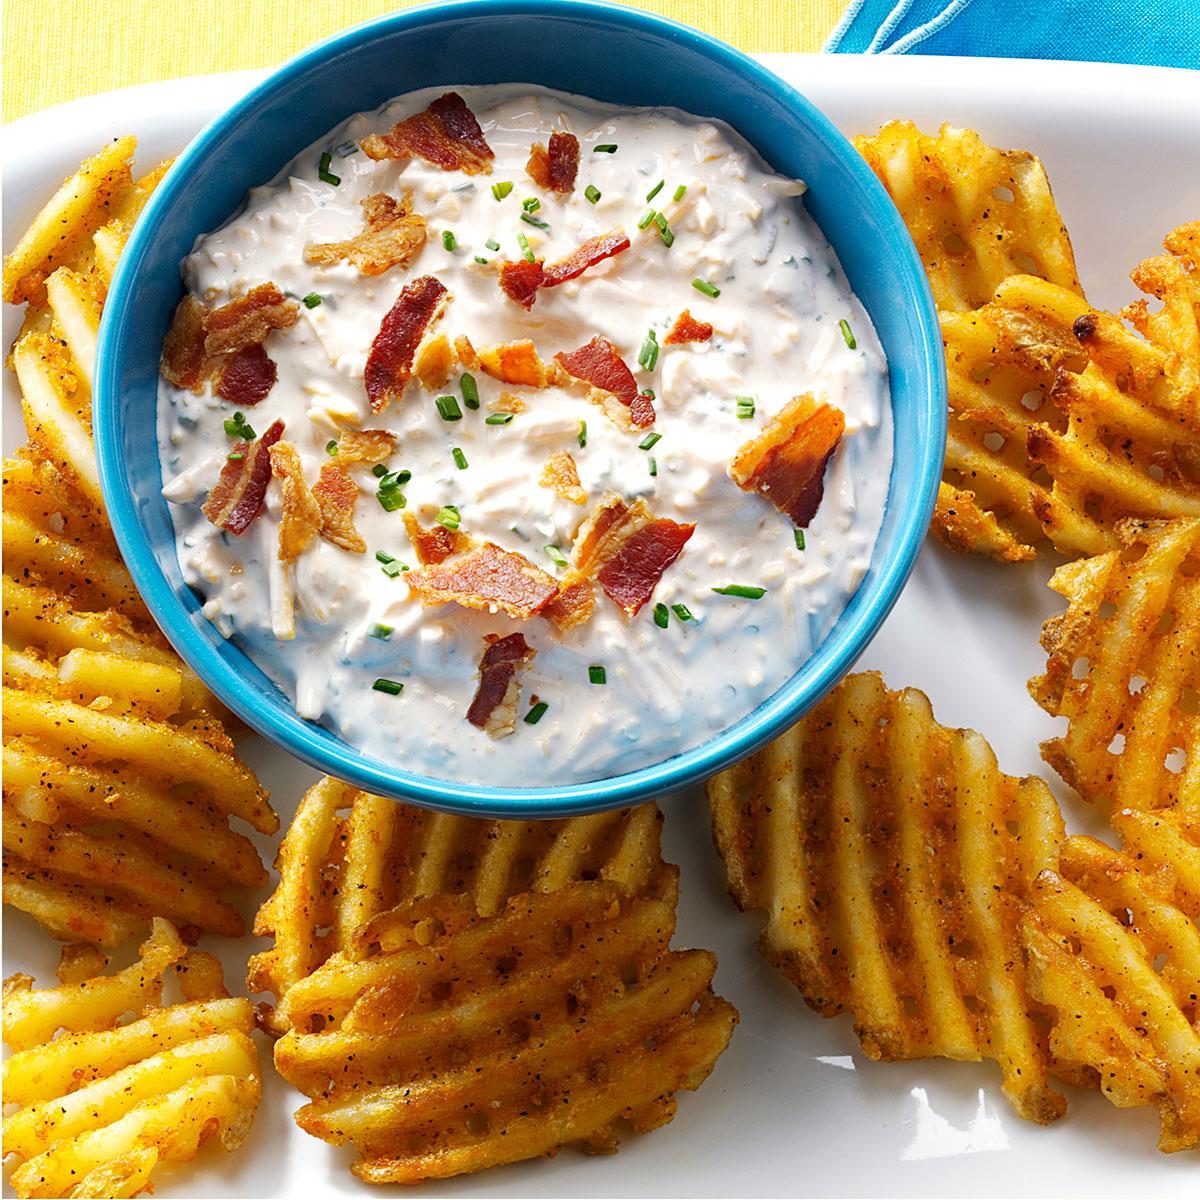 <p>I never thought of using waffle-cut fries as a scoop for dip until a friend of mine did at a baby shower. They’re ideal for my cheesy bacon and chive dip, which tastes just like a baked potato topper. —Betsy King, Duluth, Minnesota</p> <div class="listicle-page__buttons"> <div class="listicle-page__cta-button"><a href='https://www.tasteofhome.com/recipes/loaded-baked-potato-dip/'>Go to Recipe</a></div> </div>